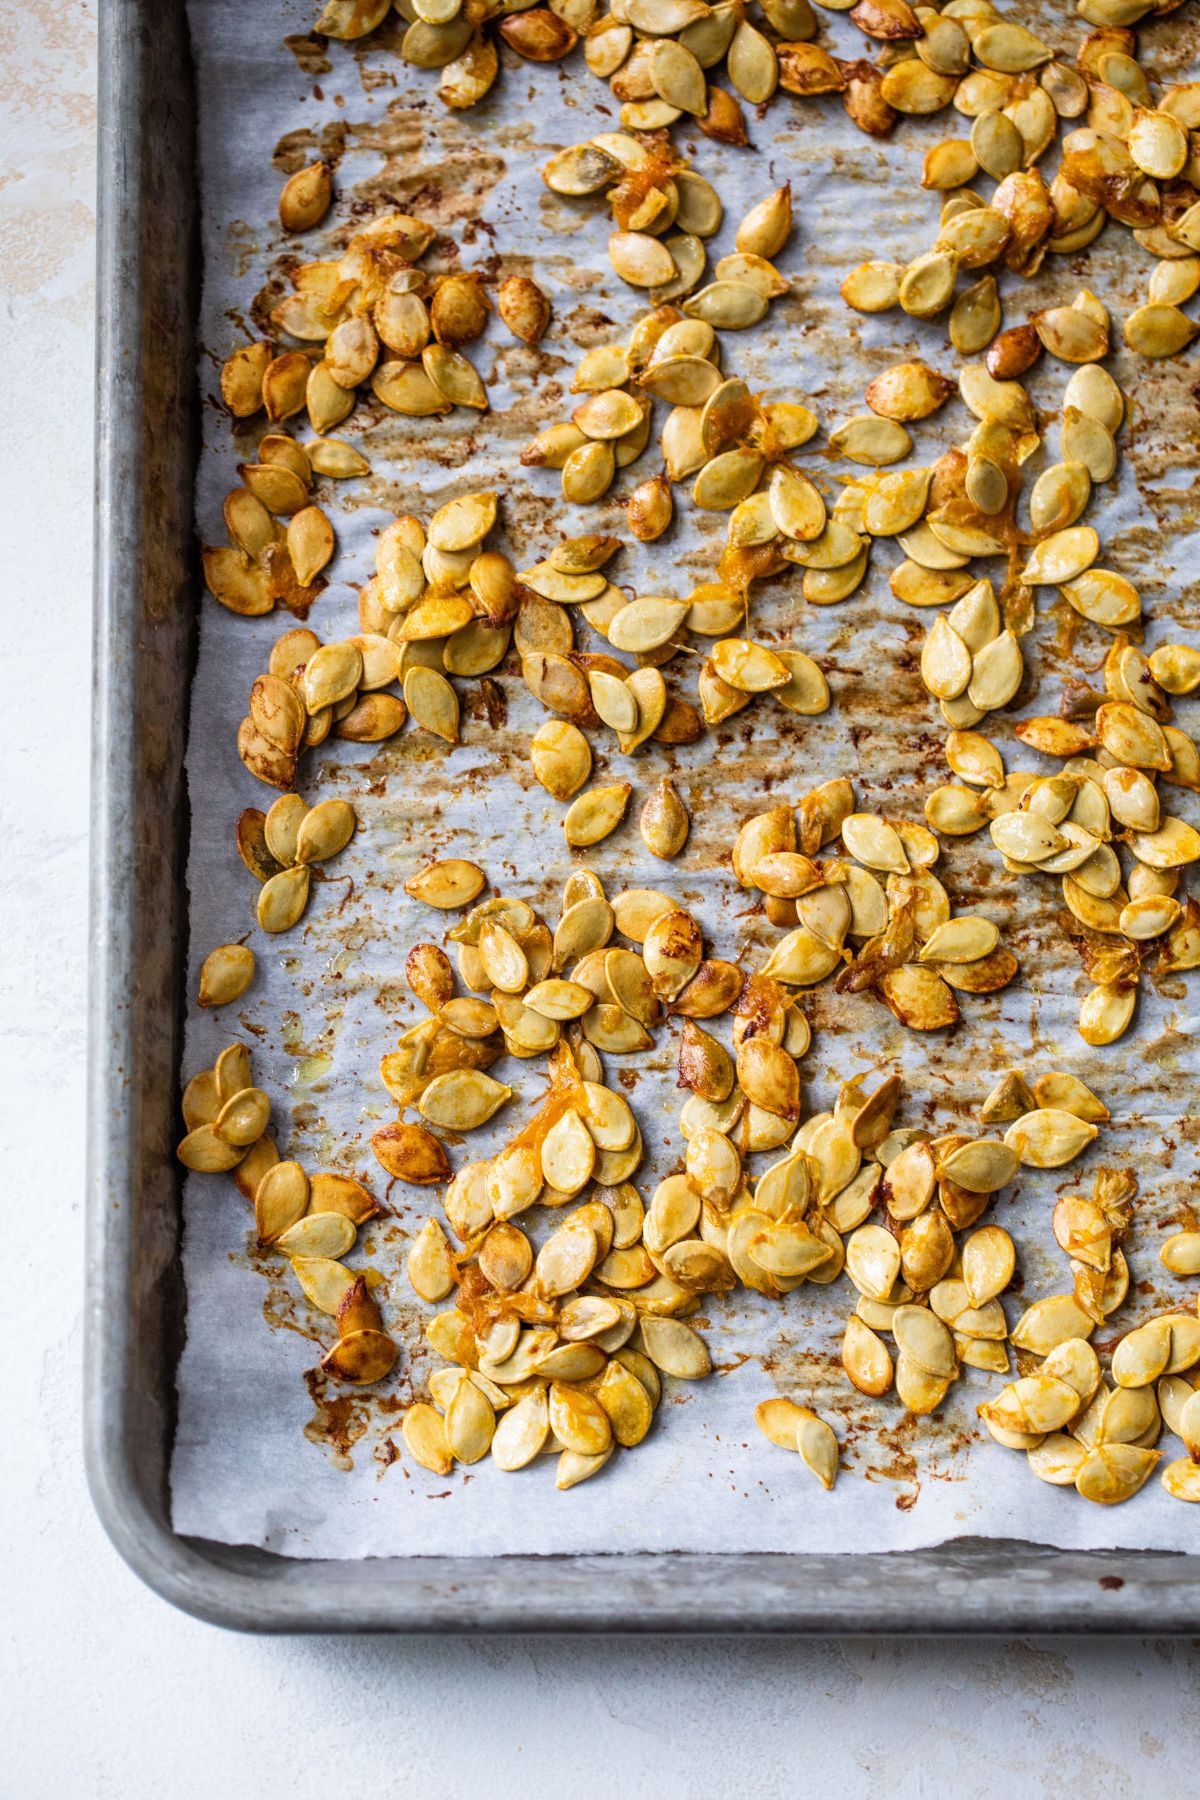 Roasted acorn squash seeds on a pan.